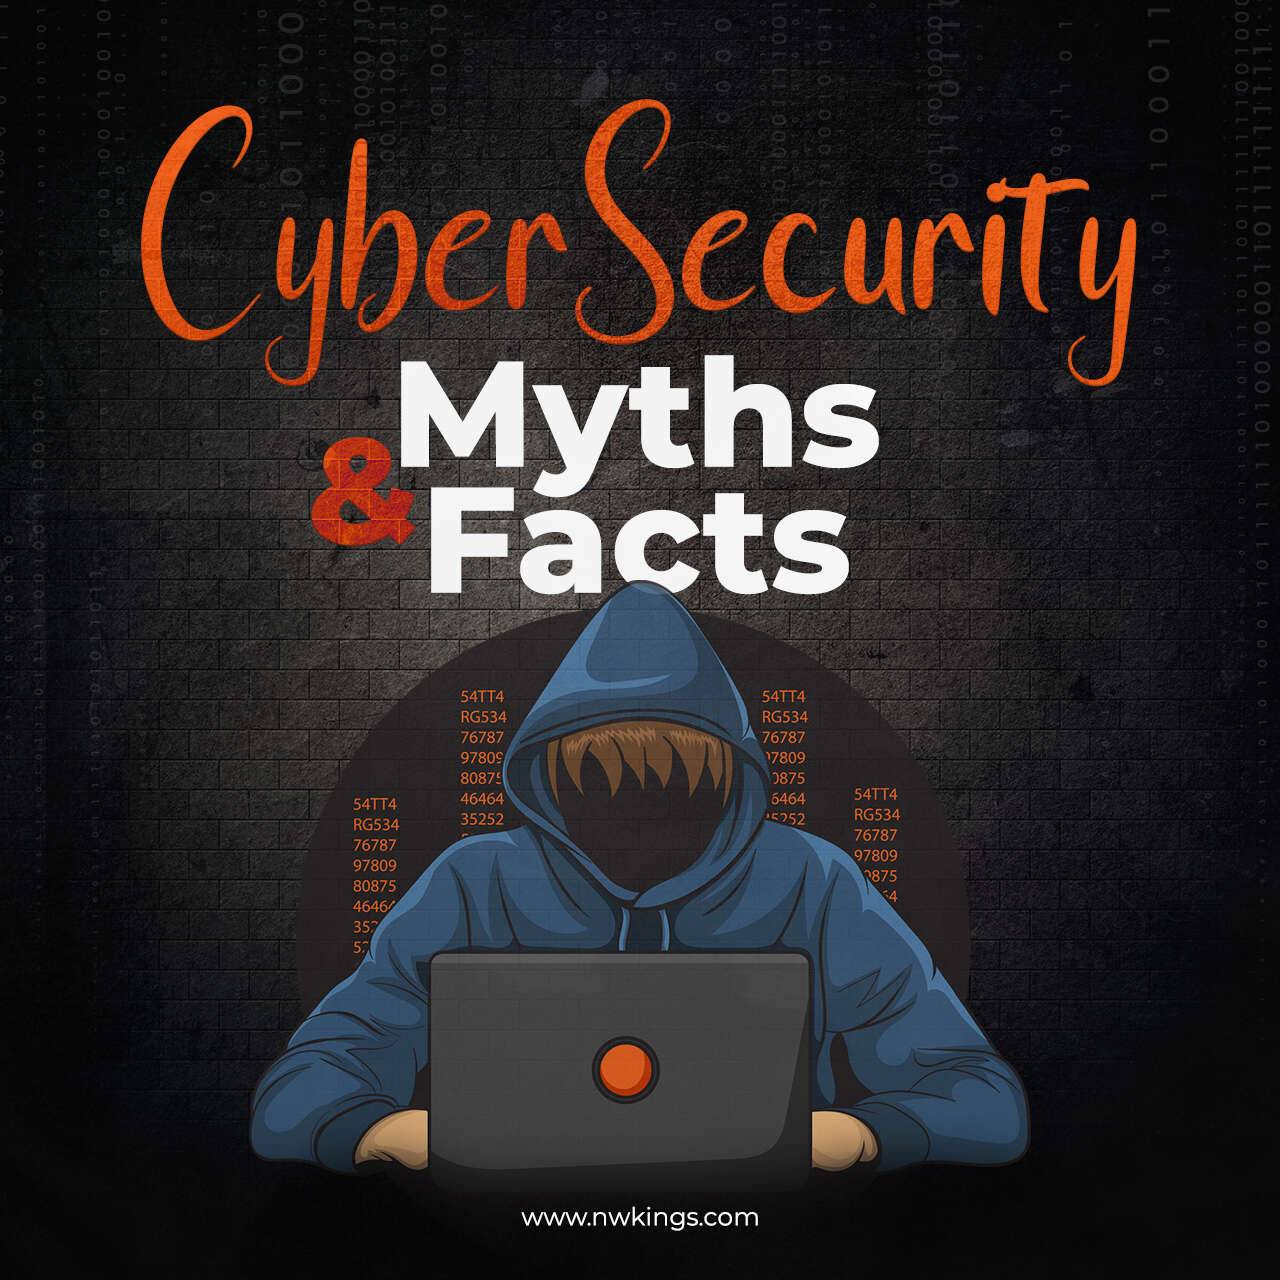 Cybersecurity: Myths and Facts